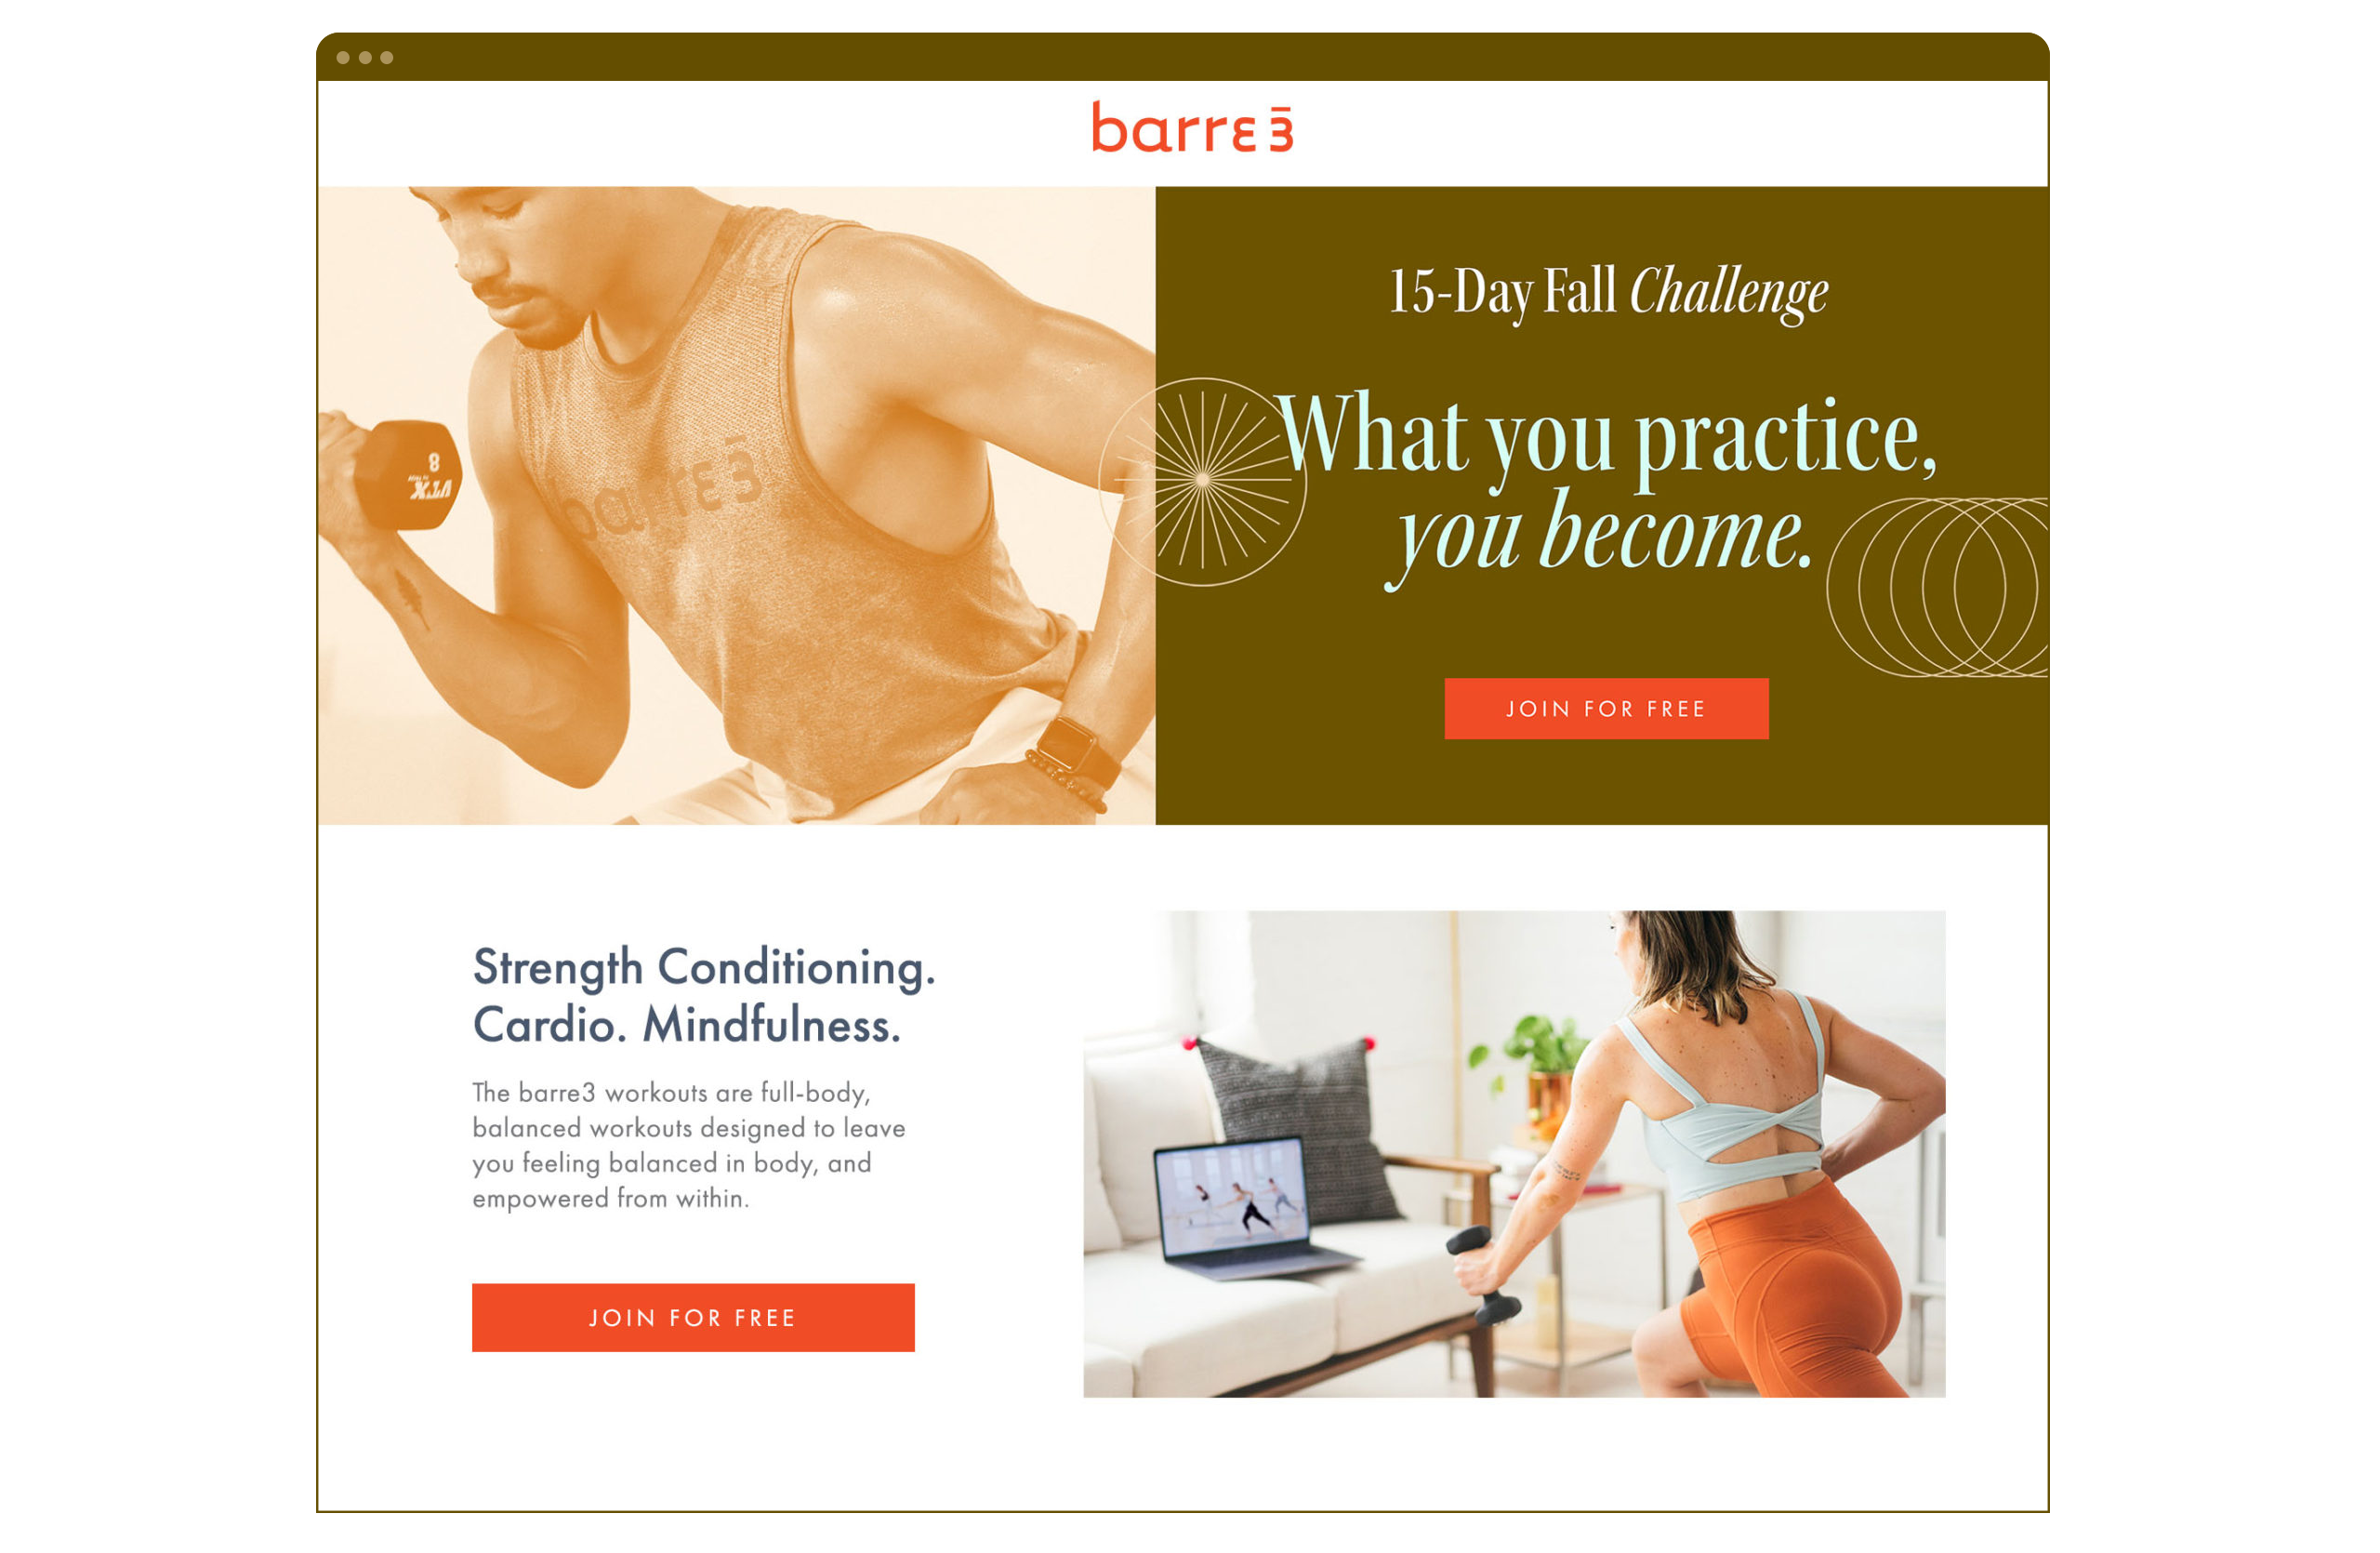 2021-barre3-Fall-Challenge-Web-copy-1-scaled-1-1